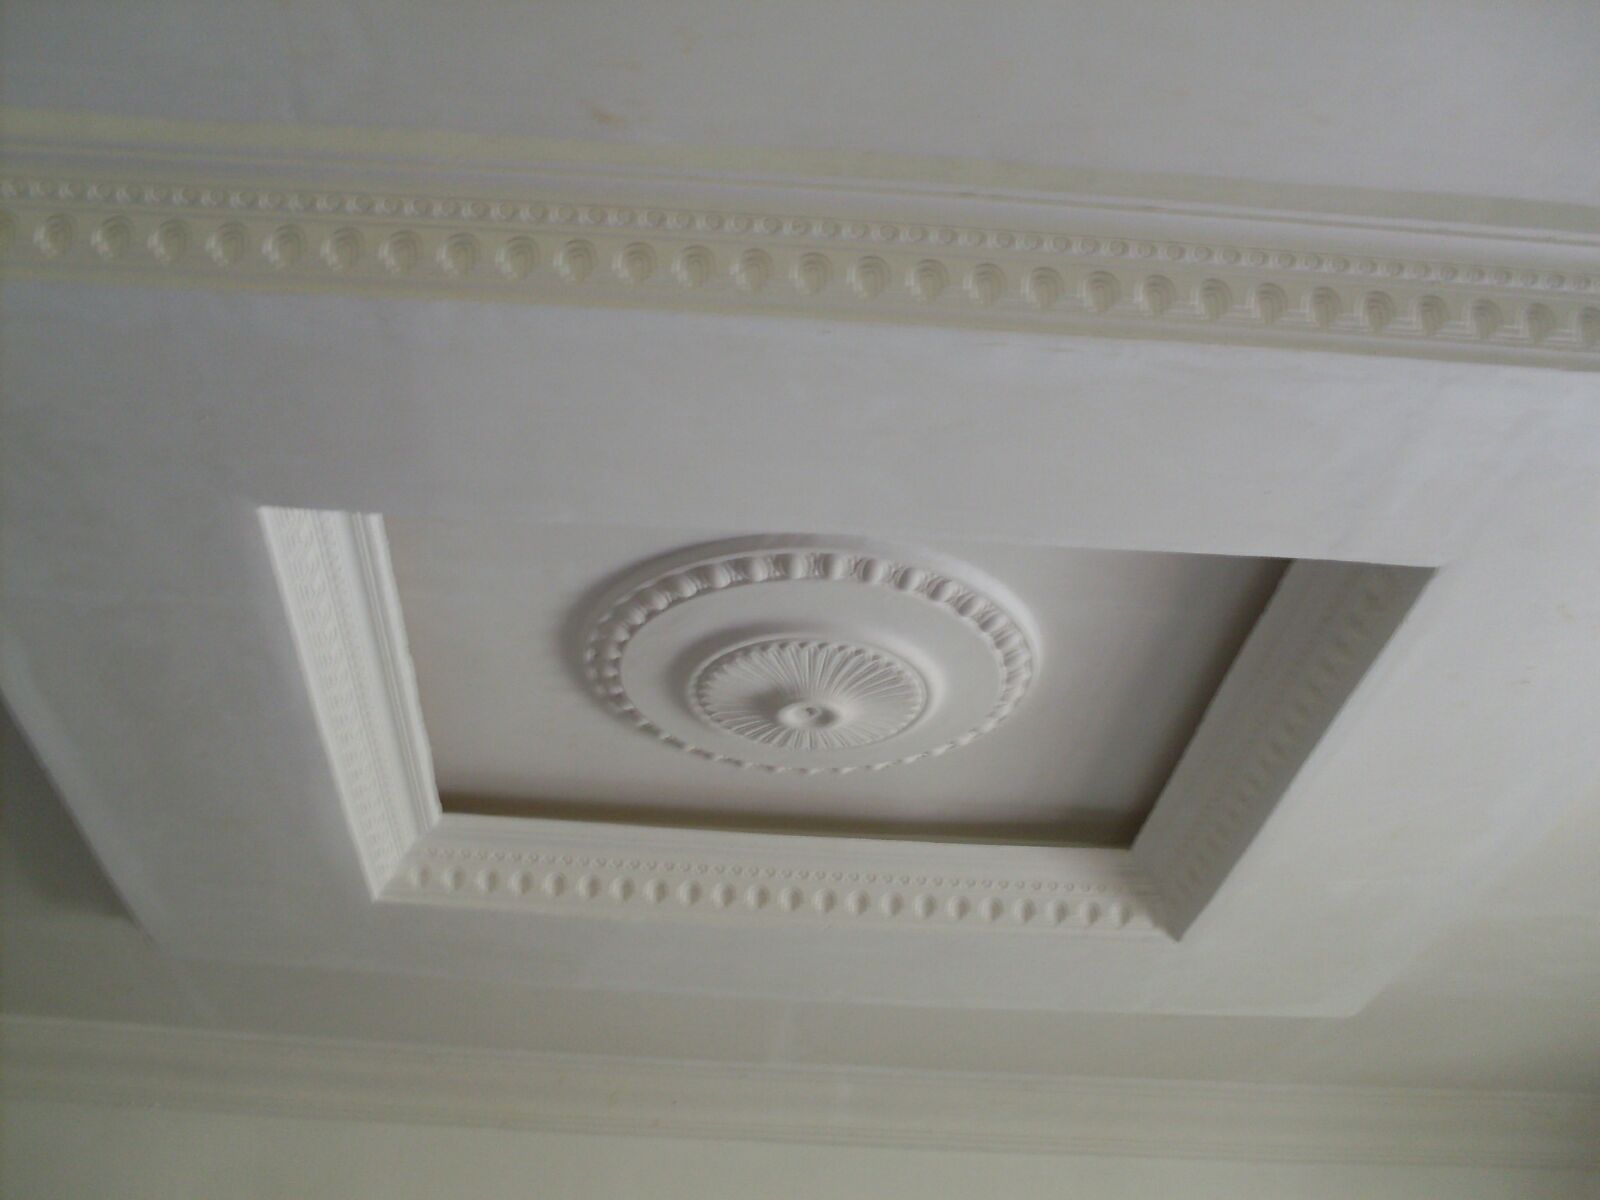 We Design All Sort Of Quality P.o.p Ceiling, Check In Here For Pictures - Properties - Nigeria